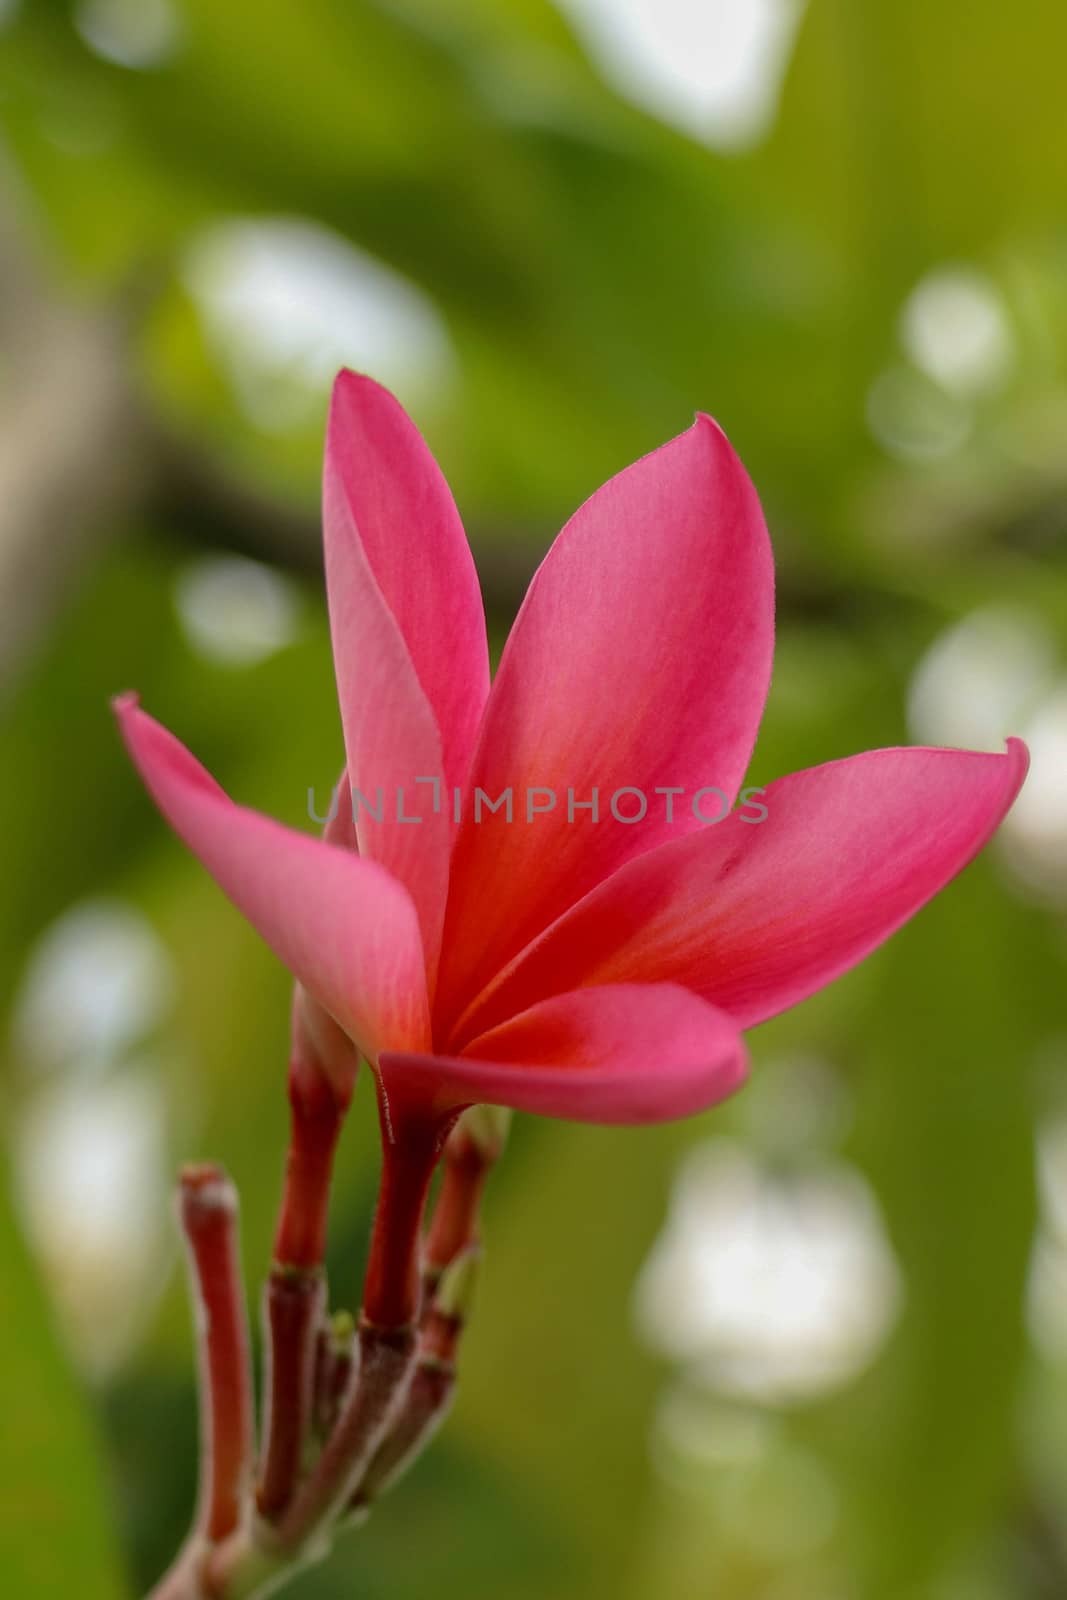 Pink plumeria on the plumeria tree, frangipani tropical flowers. Blossom Plumeria flowers on light blurred background. Frangipani close up. Flower background for romantic decoration. Health and Spa.